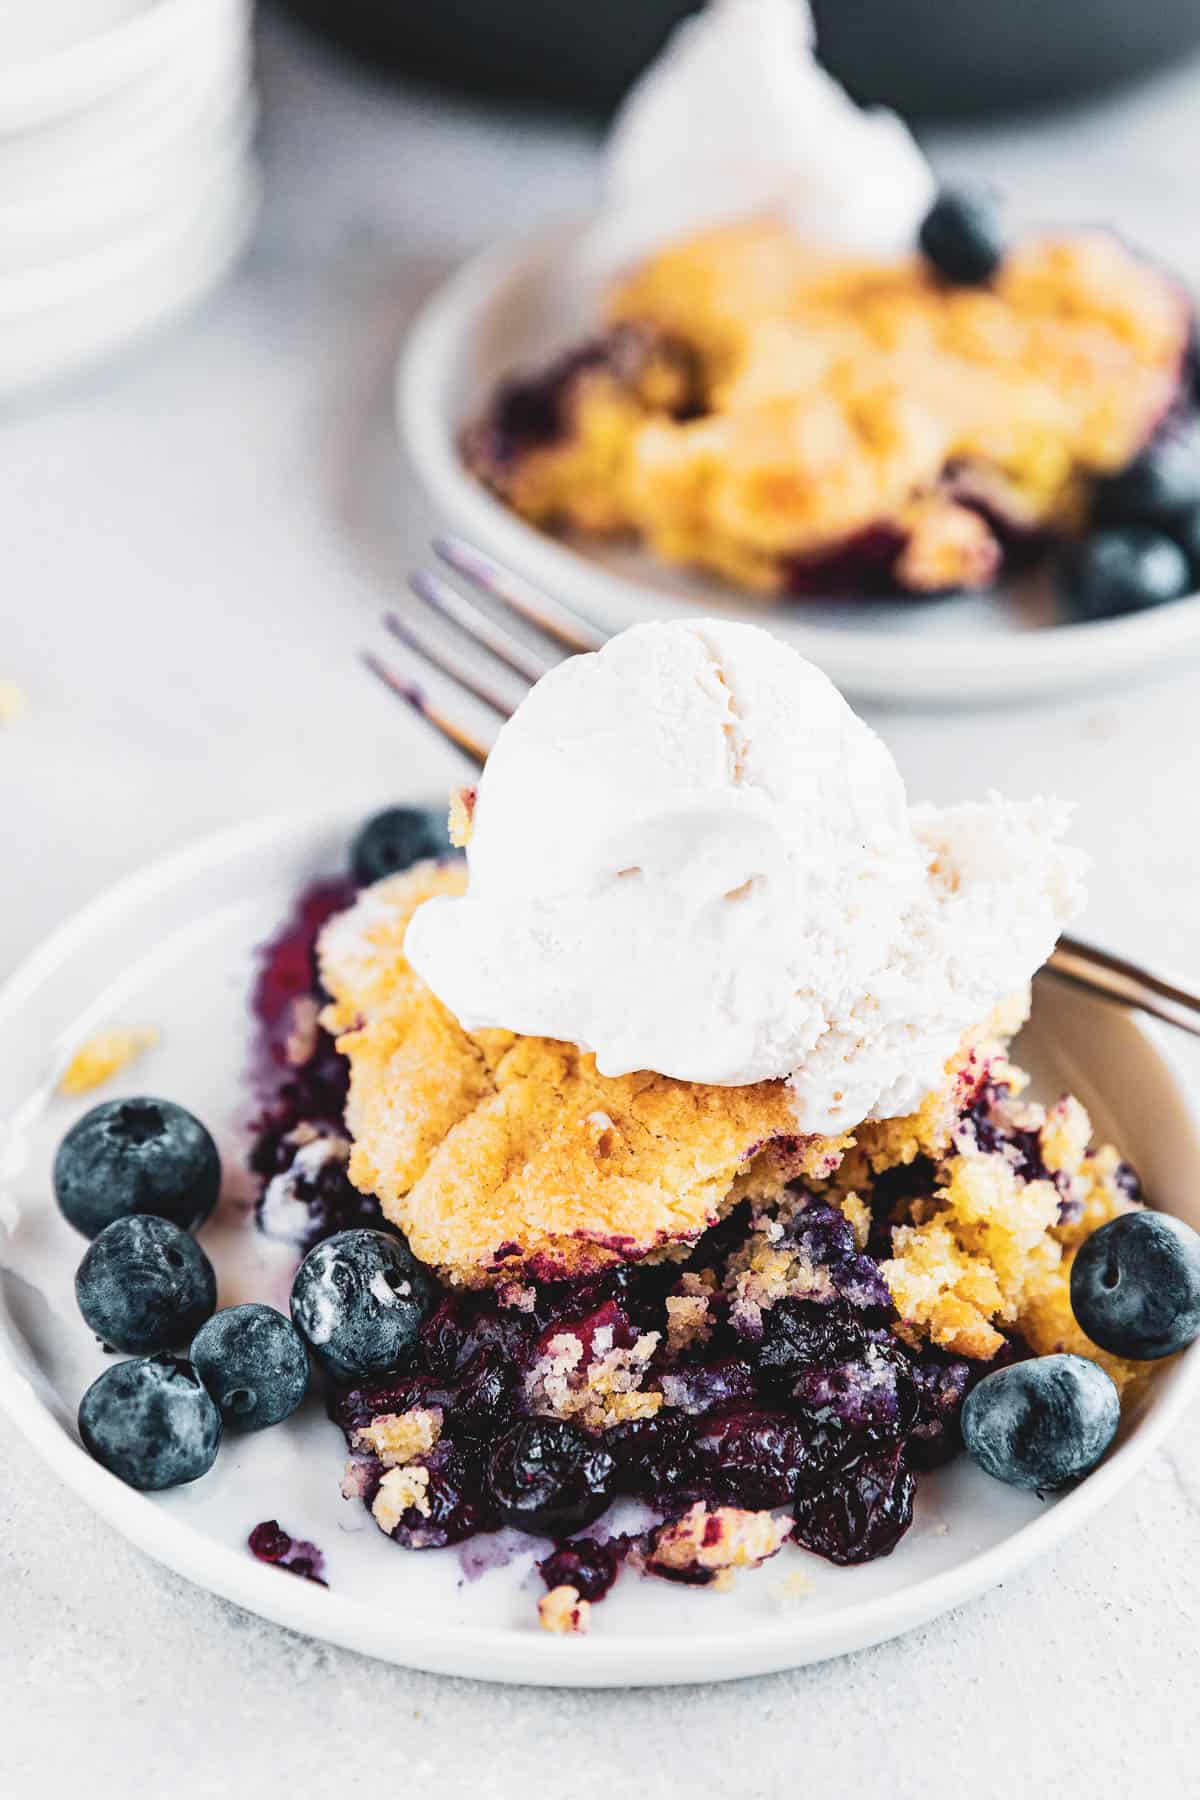 Blueberry Rhubarb Cobbler served on a plate and topped with ice cream scoop